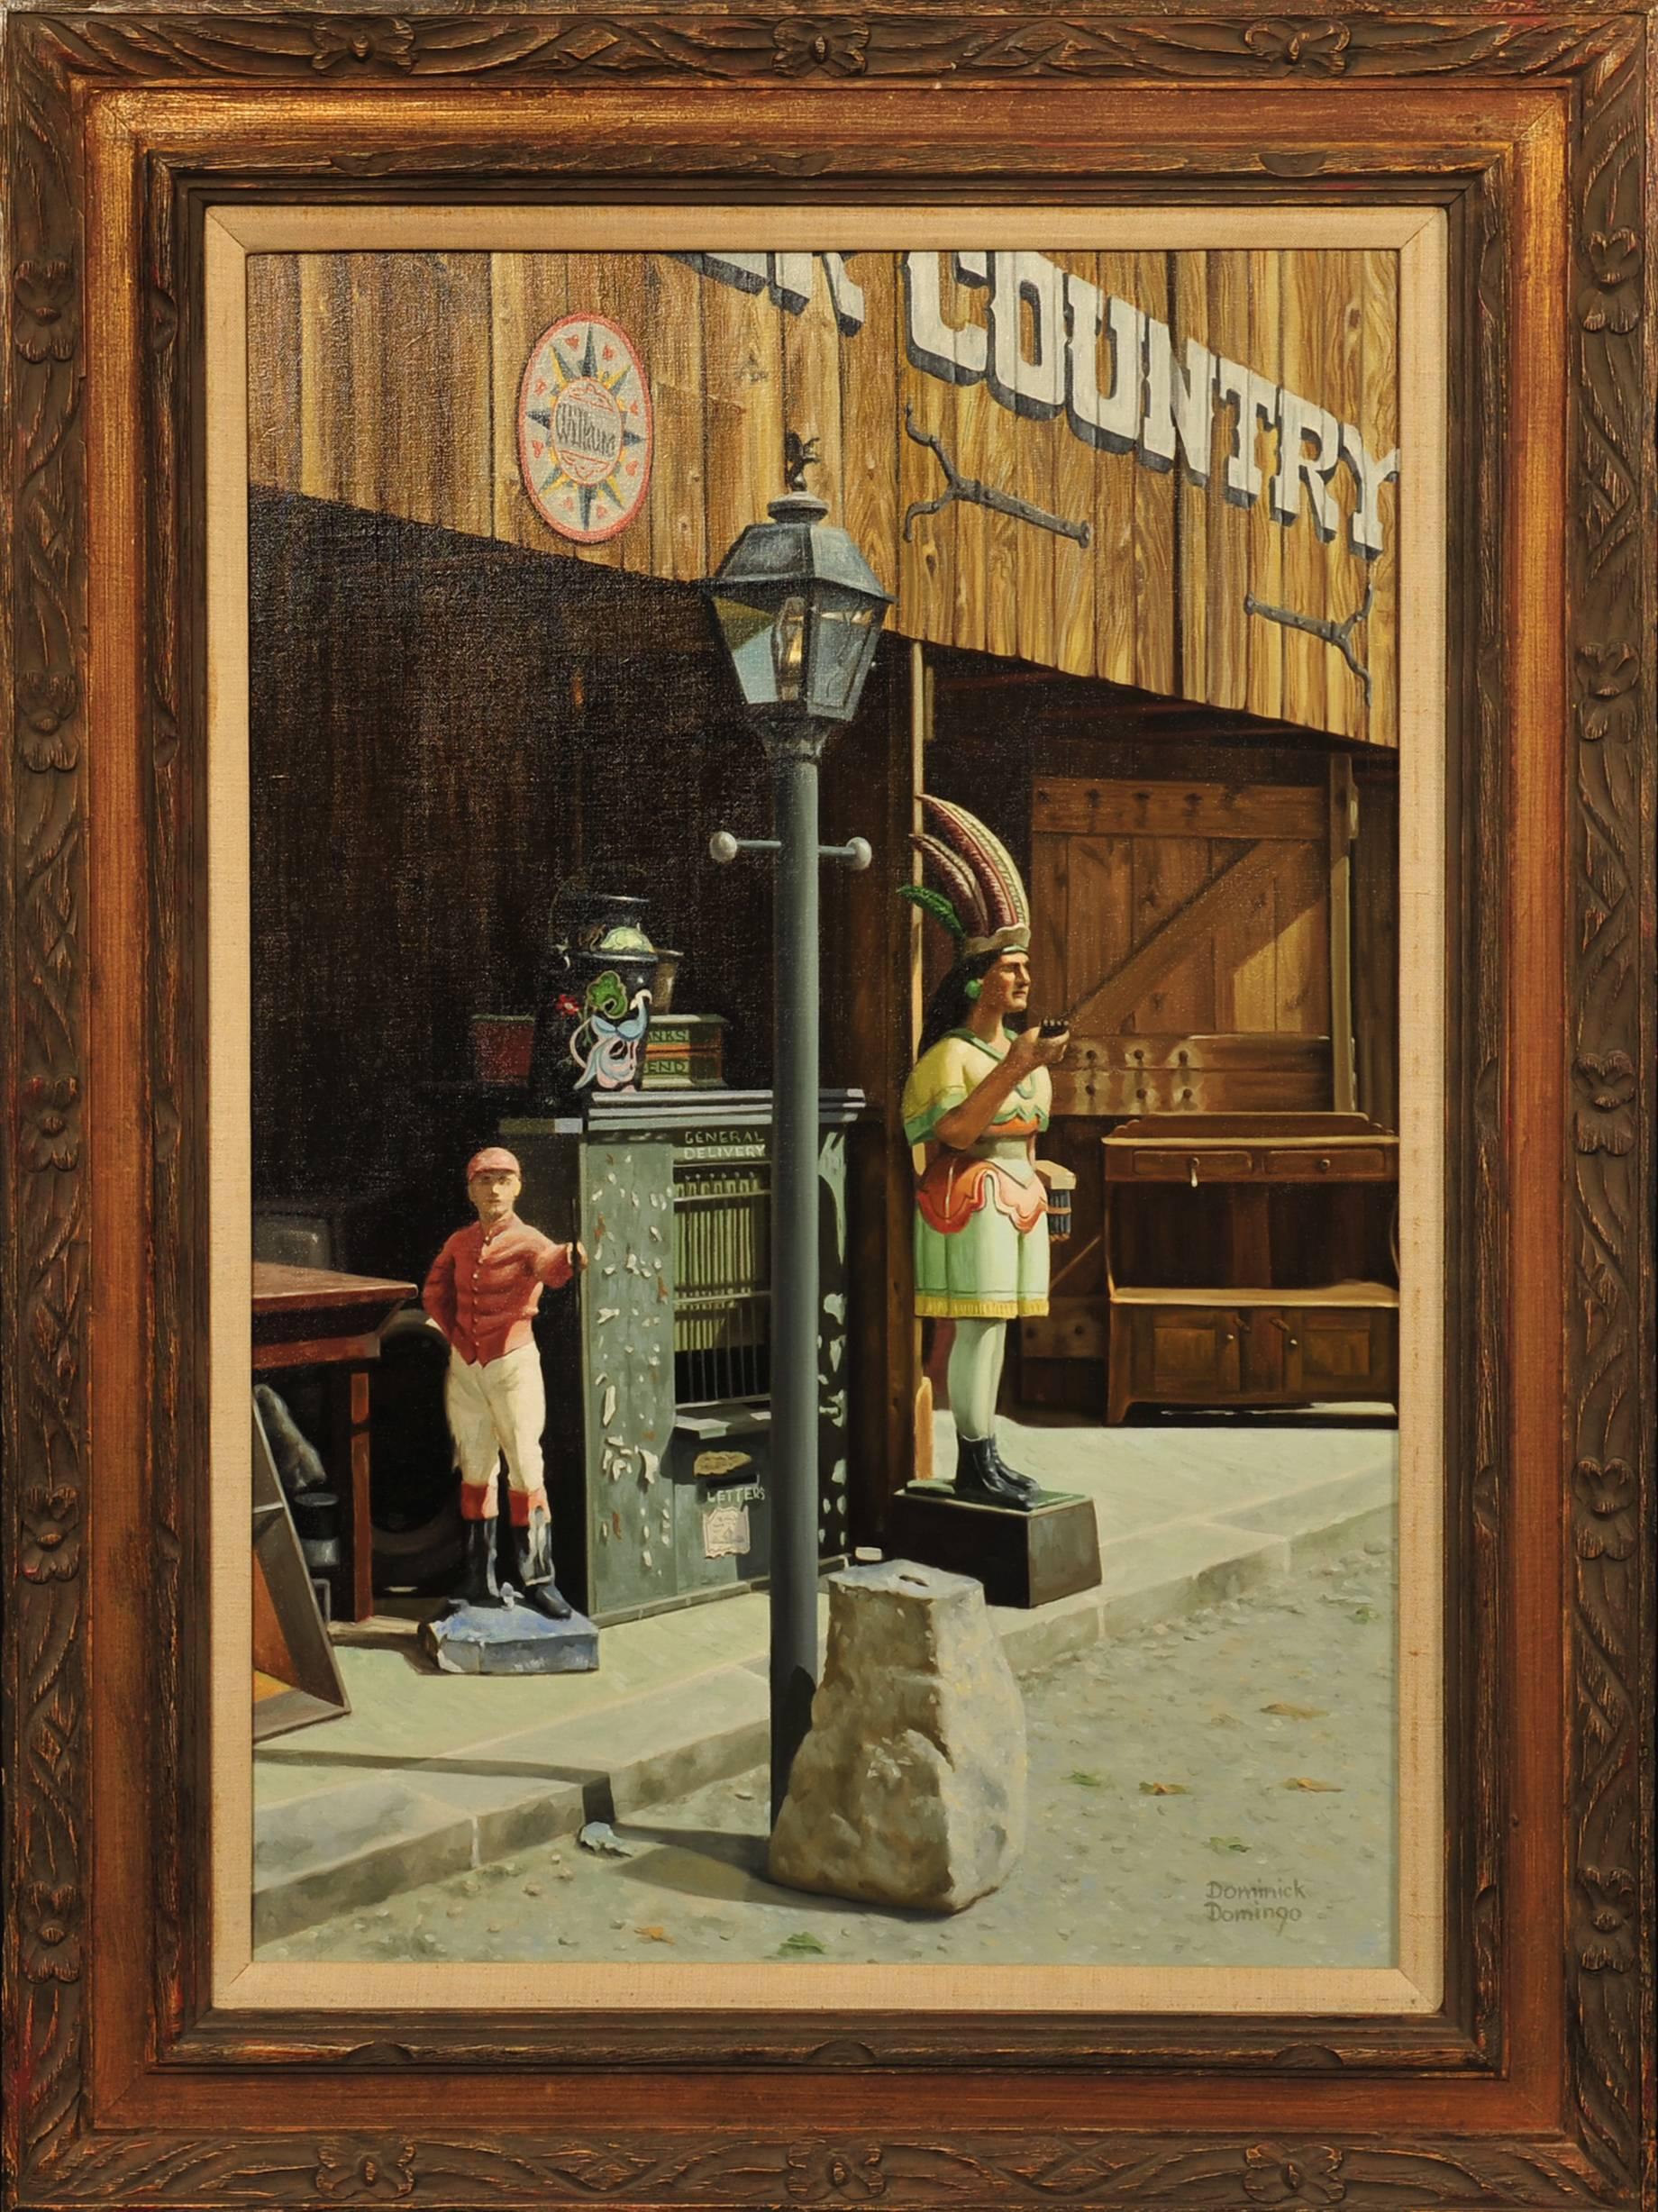 Country Store - Painting by Dominick Domingo